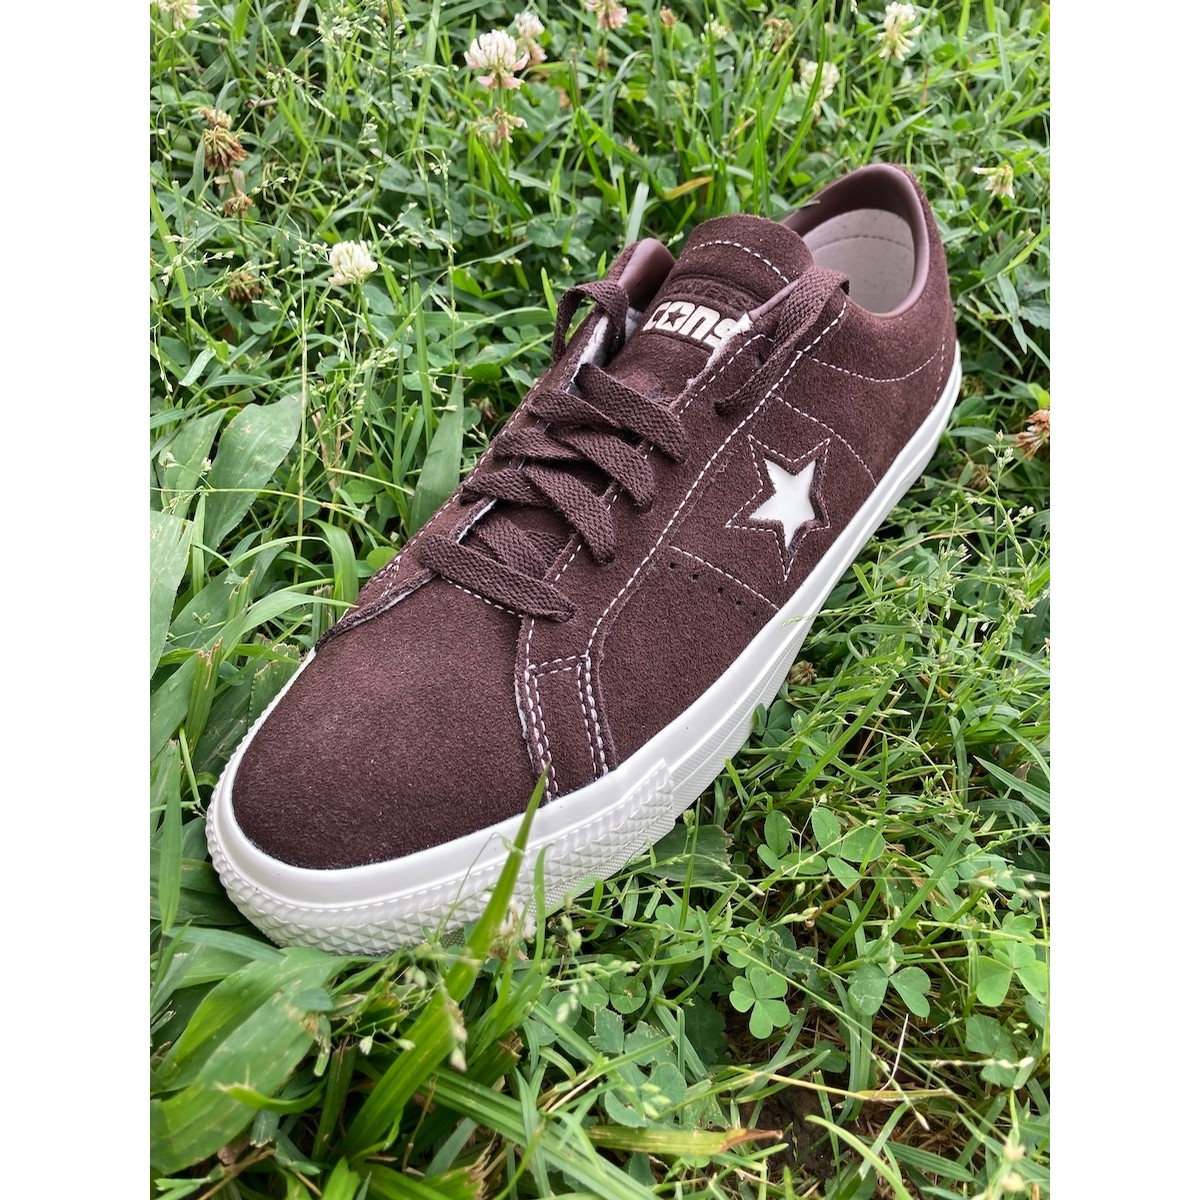 converse one star ox brown Off 62 